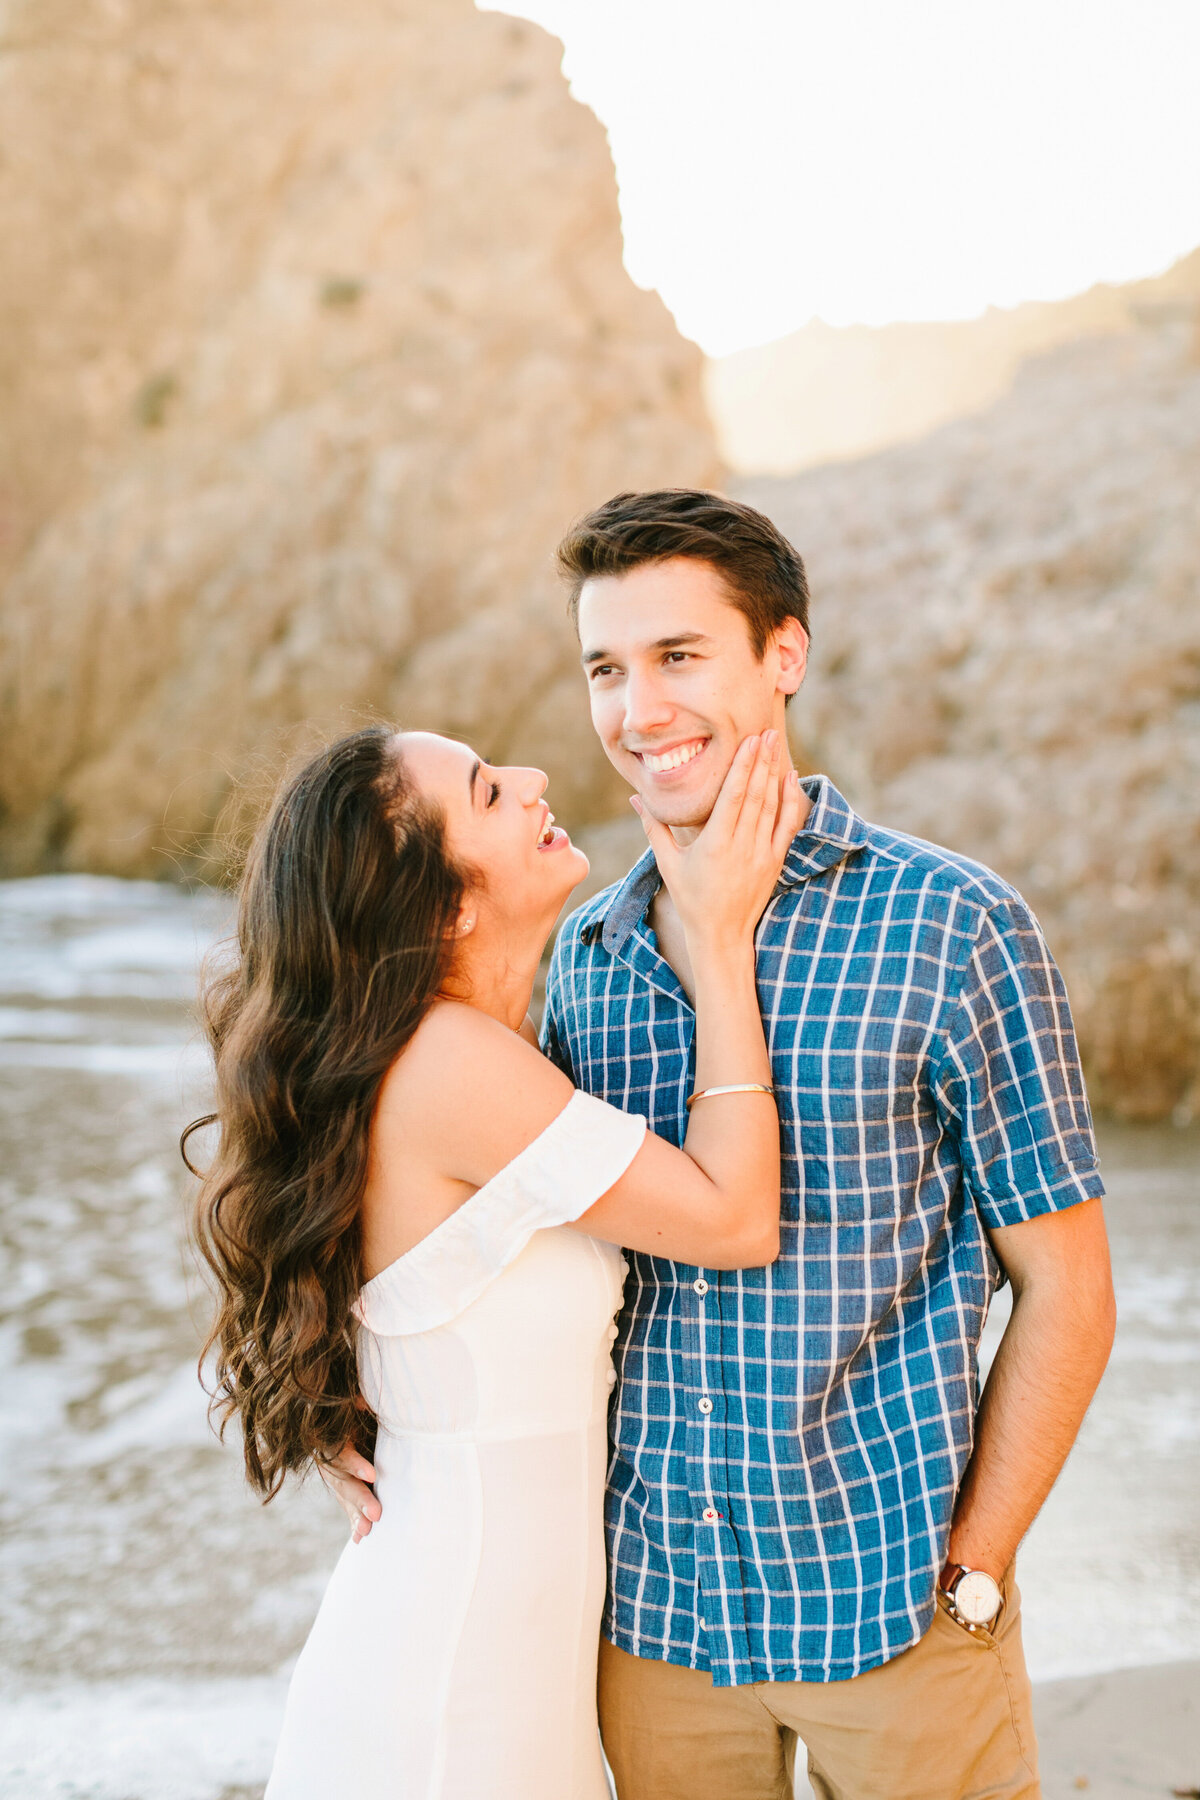 Best California and Texas Engagement Photographer-Jodee Debes Photography-143